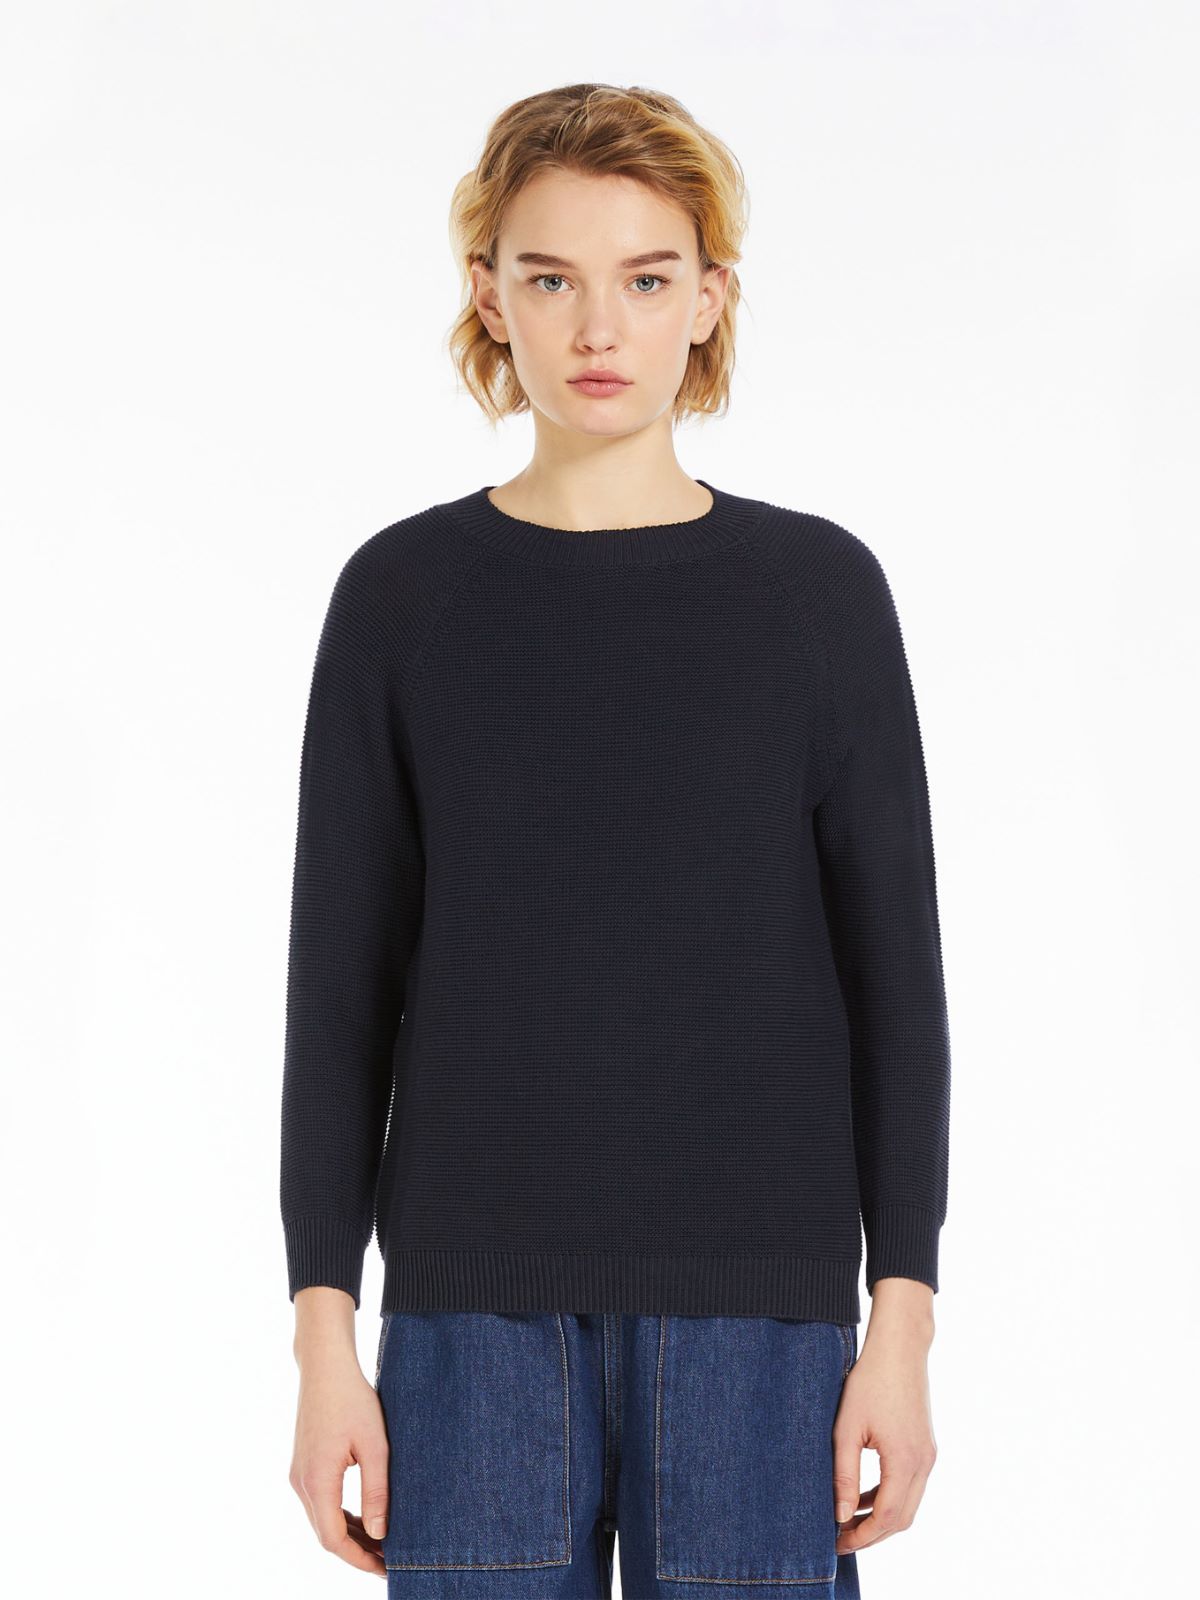 Relaxed-fit cotton sweater, navy | Weekend Max Mara